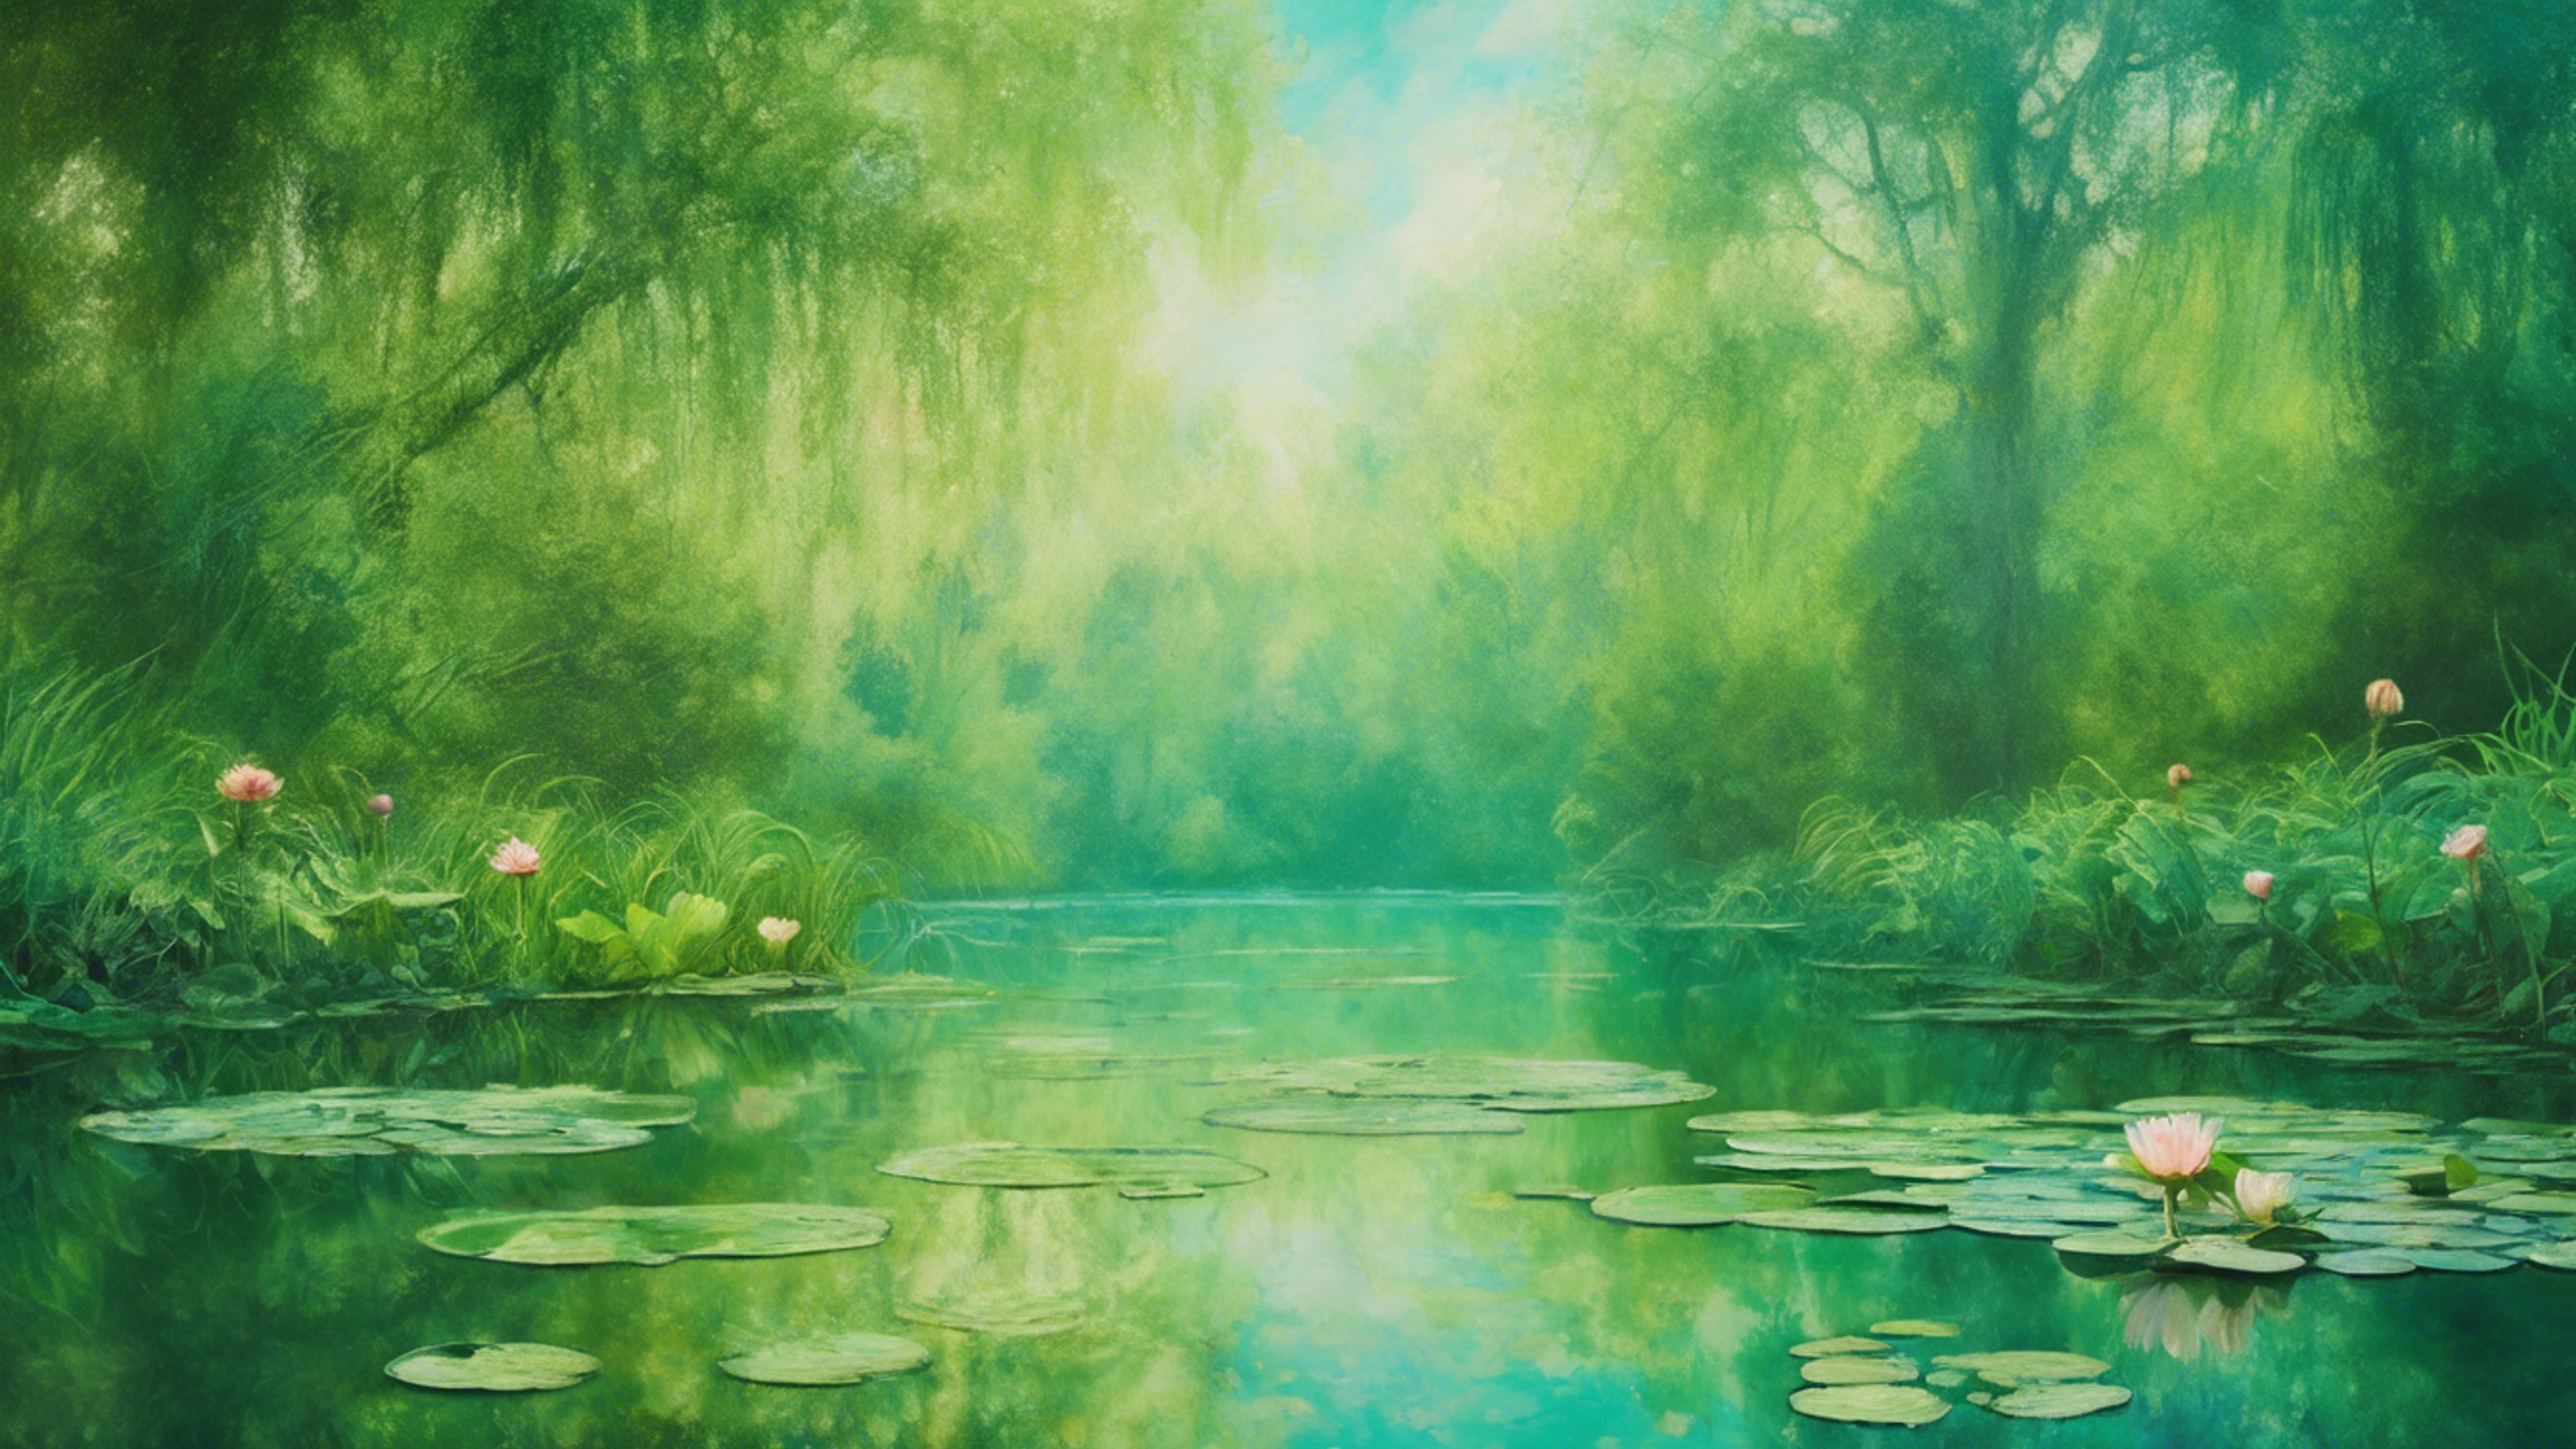 A landscape painting inspired by Monet's Water Lilies, with cool green hues. ផ្ទាំង​រូបភាព[9f0abb477fe746e08ba1]